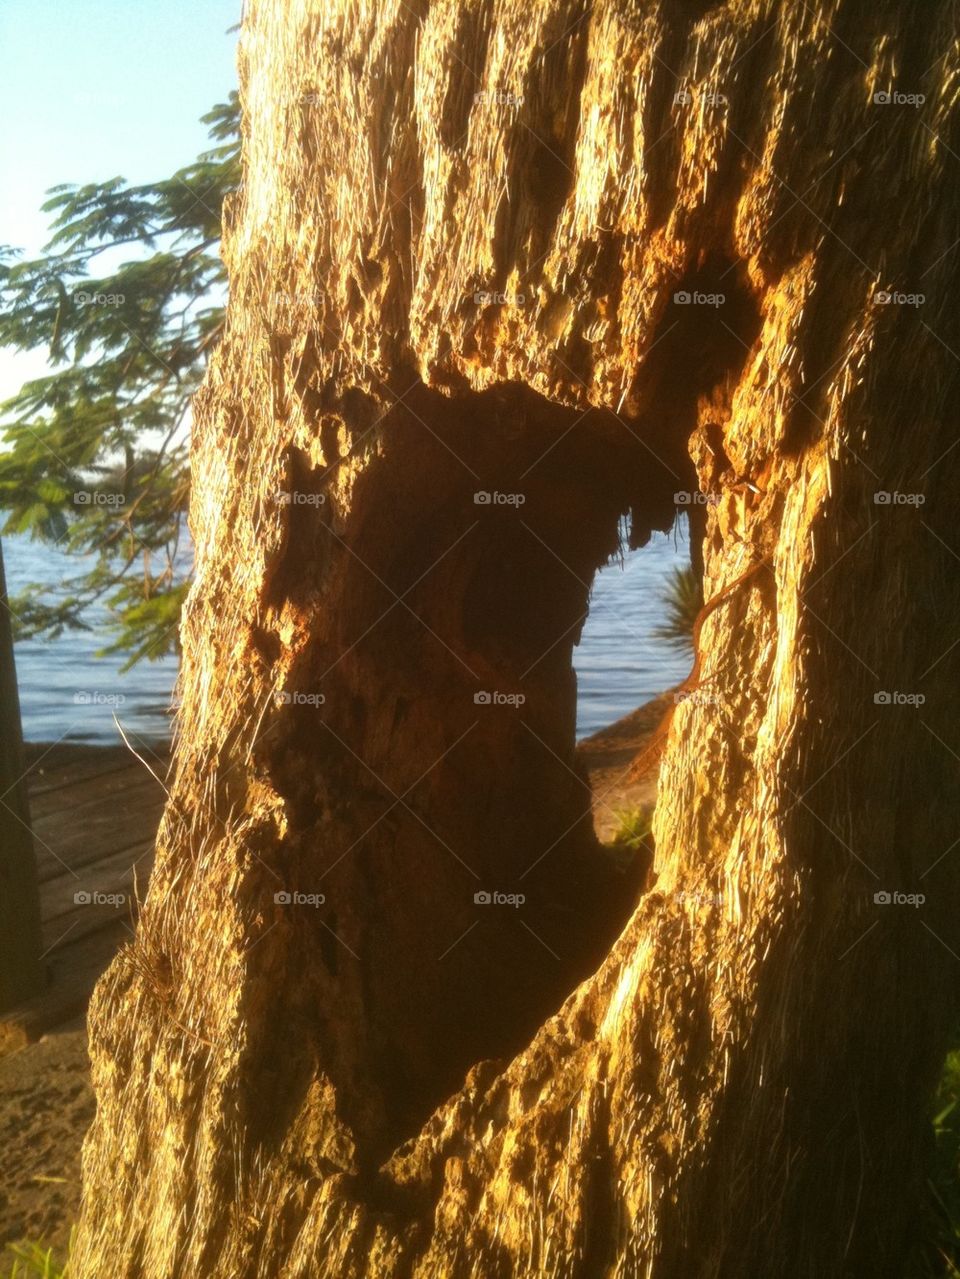 Looking through the heart of a Tree